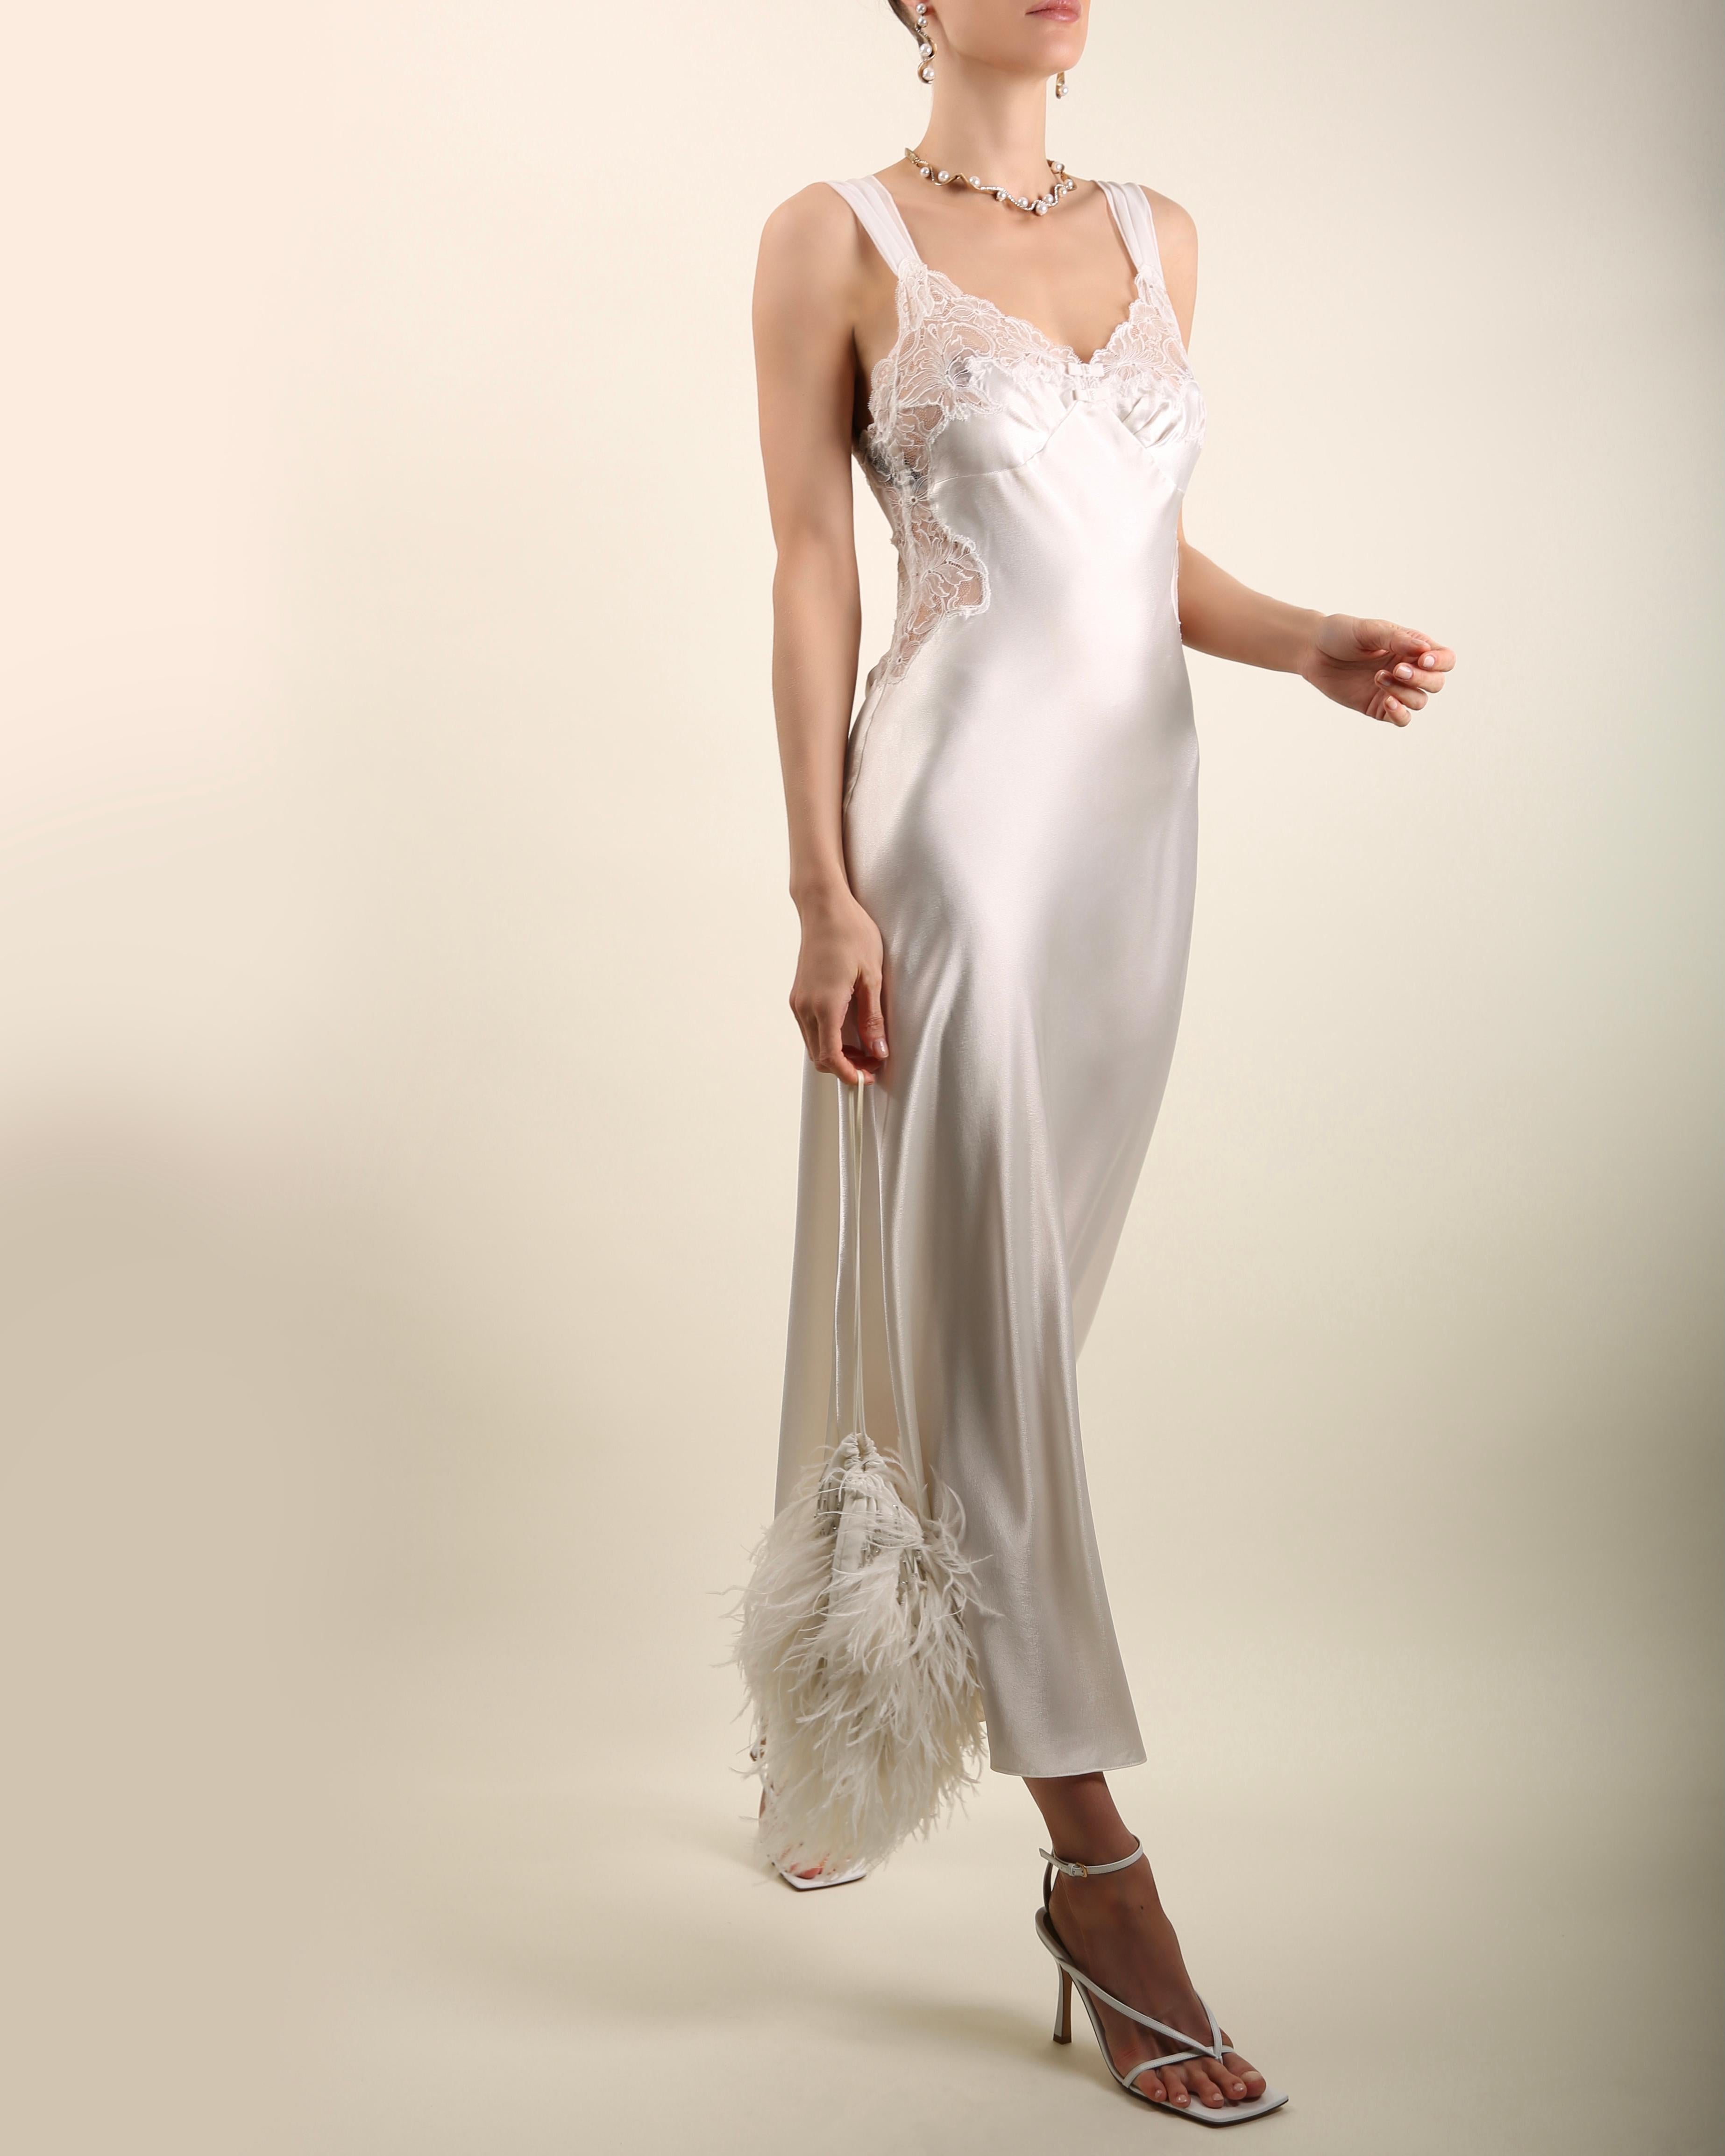 A beautiful vintage nightgown by Christian Dior in ivory satin which can easily be worn as a slip dress in an evening teamed with a pair of high heels
Midi length
Body skimming fit
Sheer lace detail to the bust and sides with slightly sheer wide